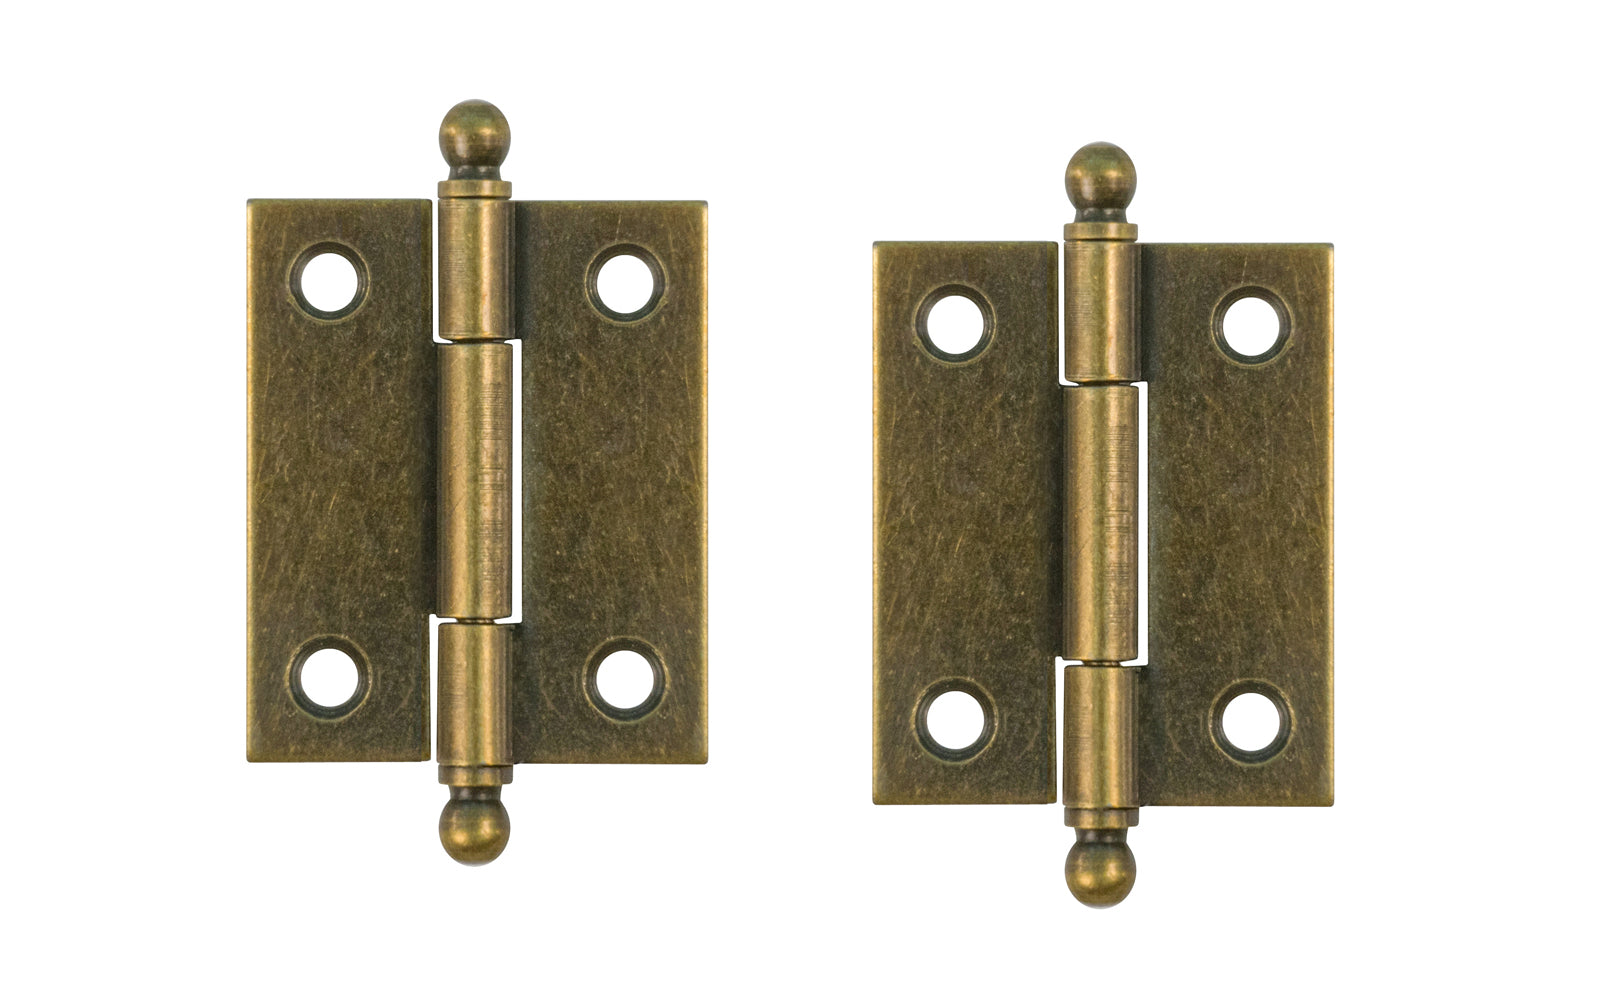 Pair of Loose Pin Plated Steel Ball-Tip Cabinet Hinges ~ 2 x 1-3